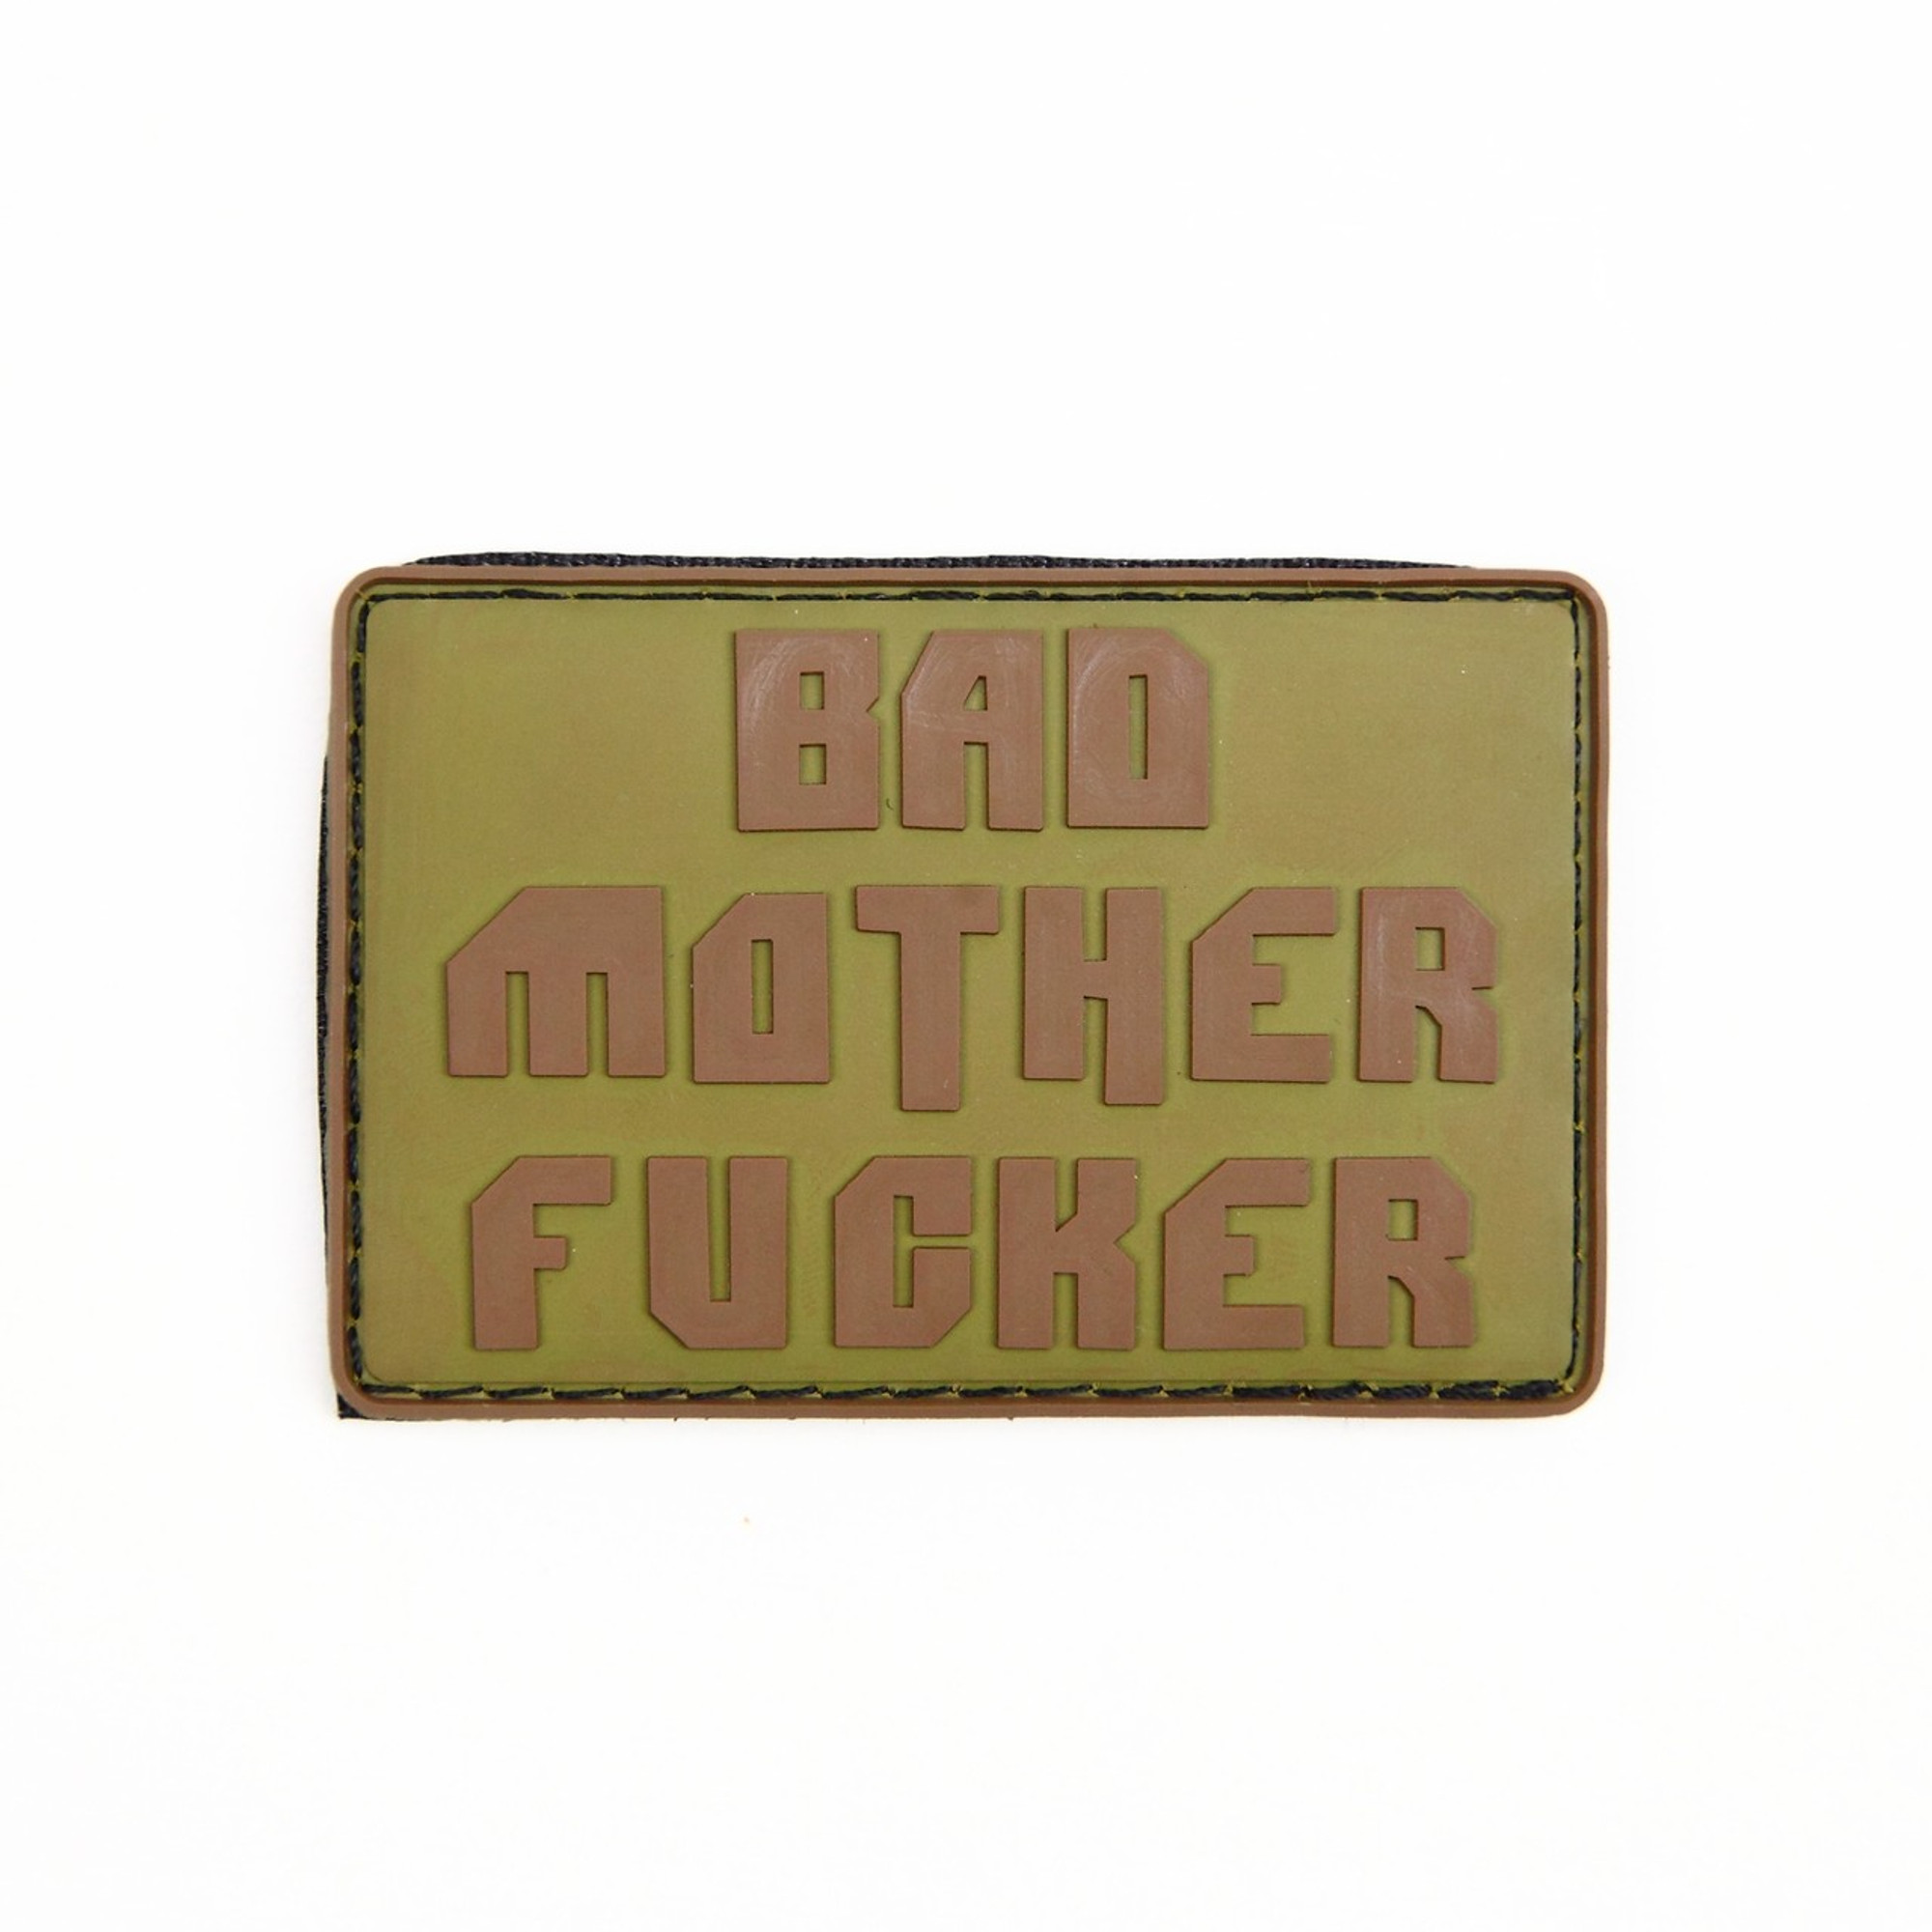 Bad Mother Fucker - Tan - Morale Patch